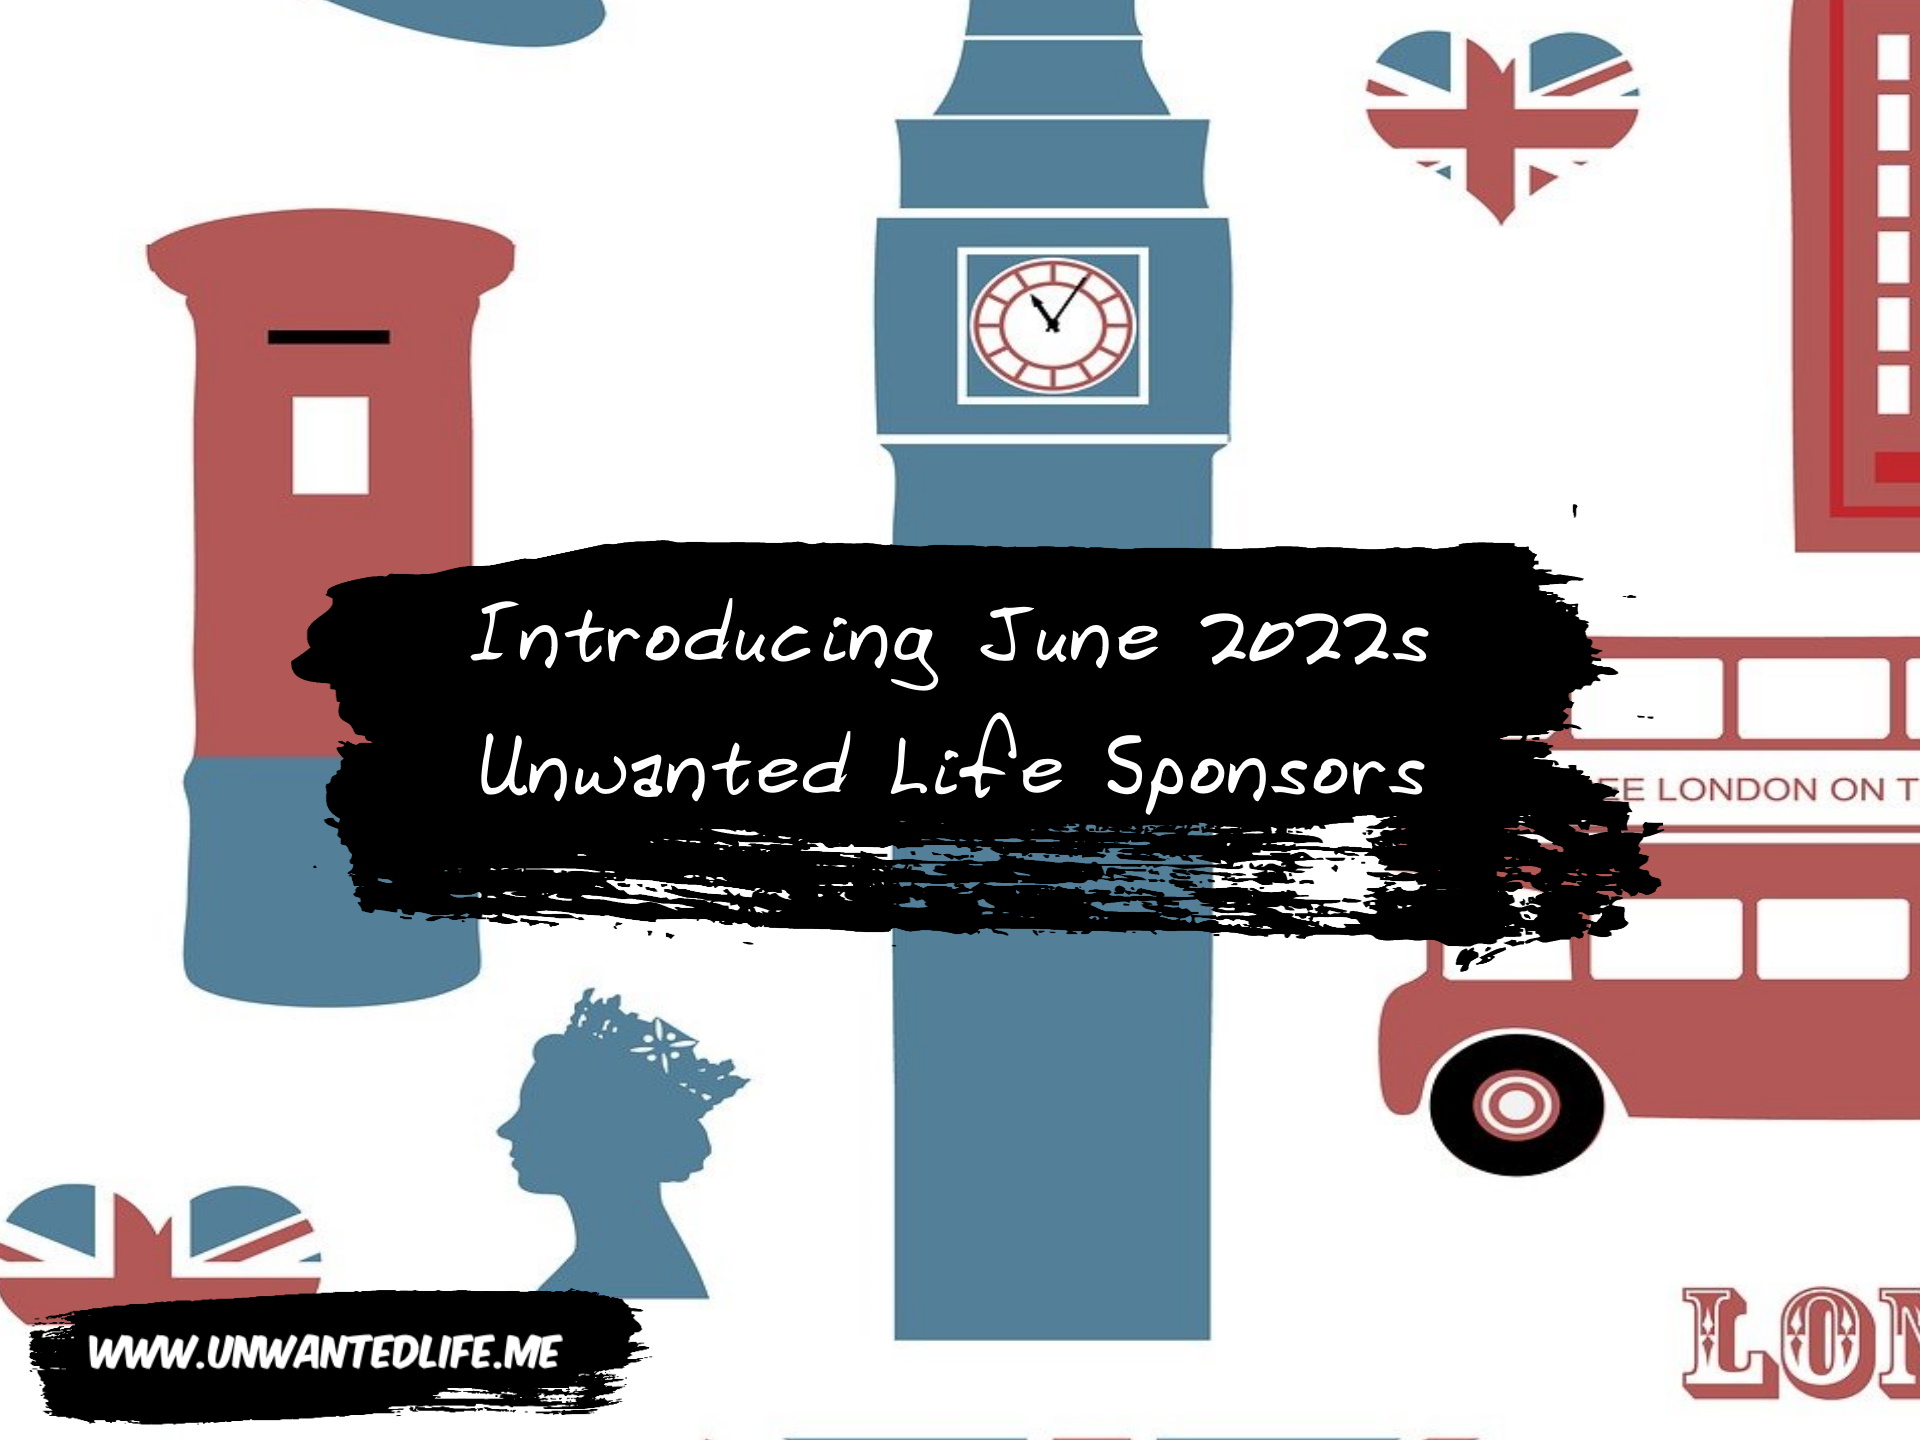 A section of images that represent London, including the the image of the Queen on a UK stamp with the title of the article across the middle, which says - Introducing June 2022s Unwanted Life Sponsors